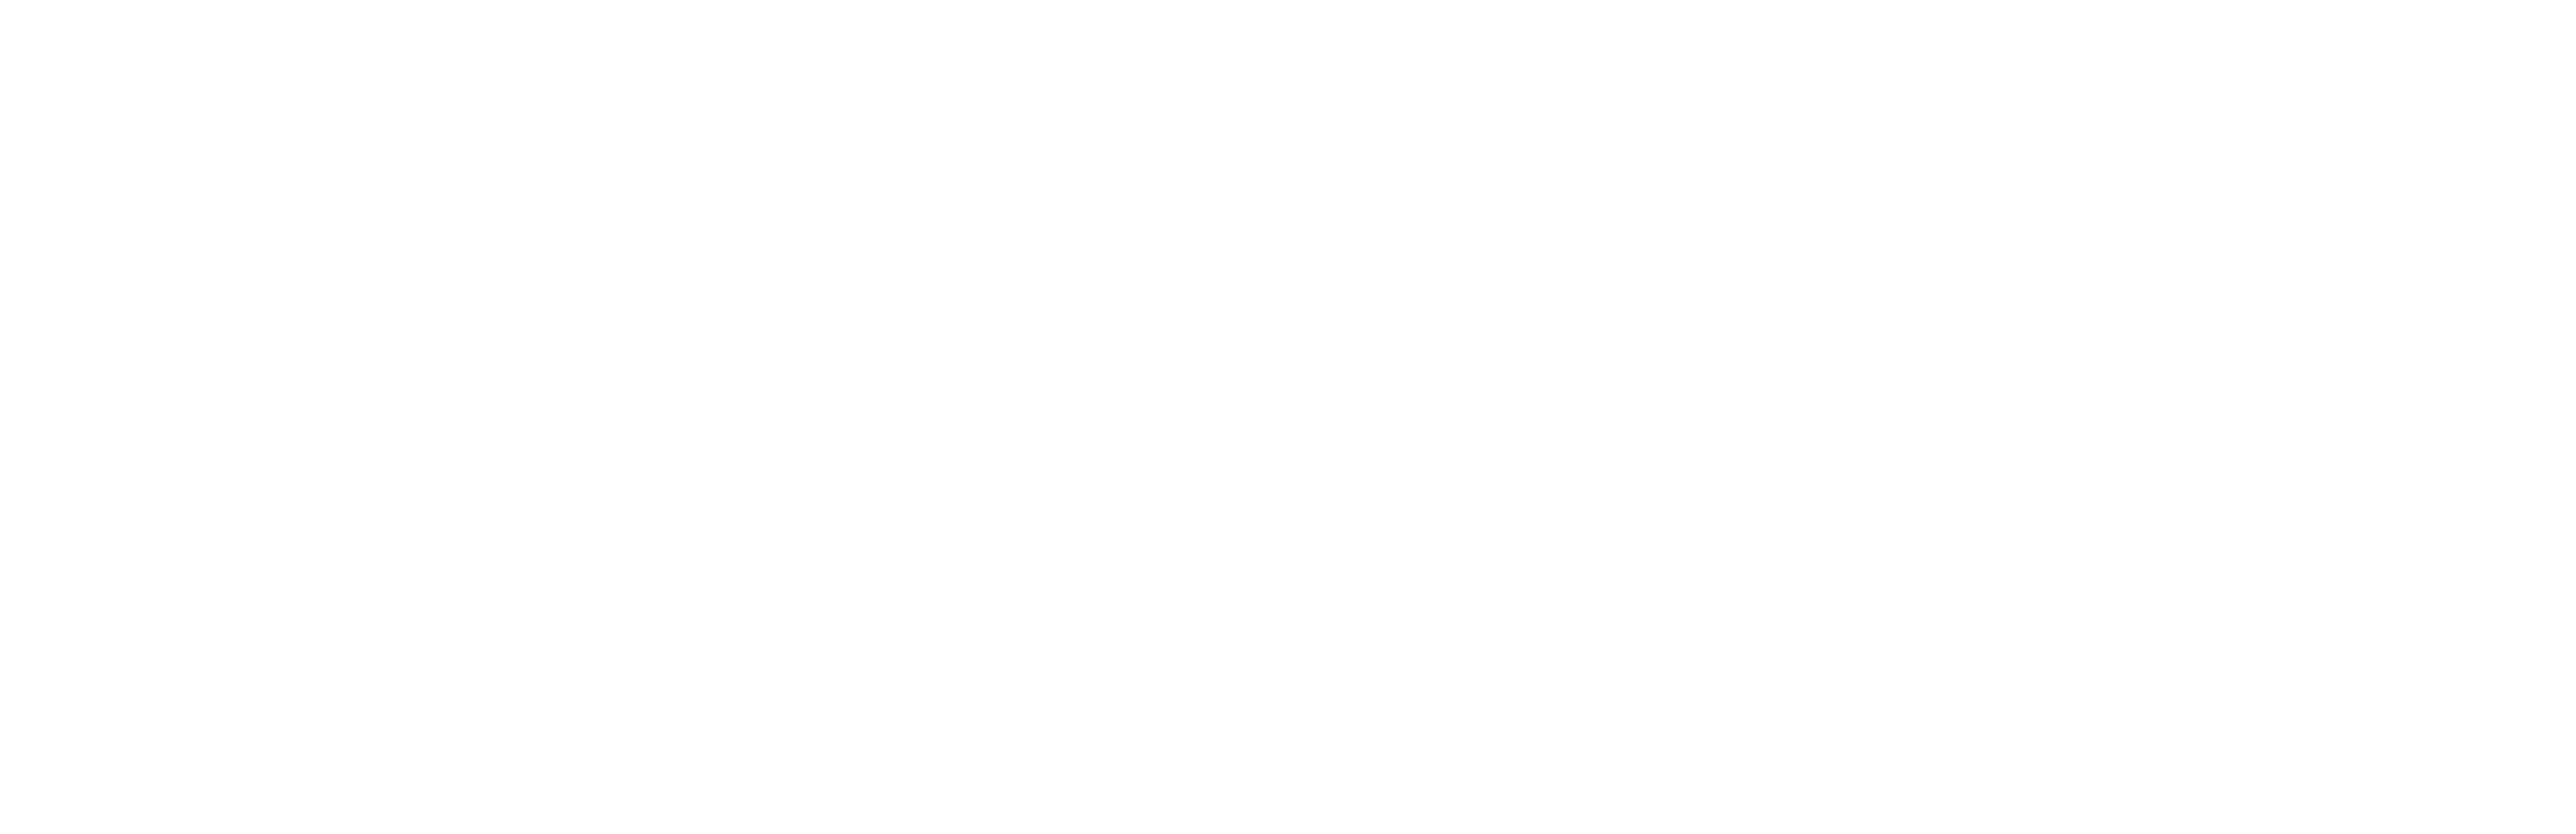 rookie-dads-logo-white-1.png